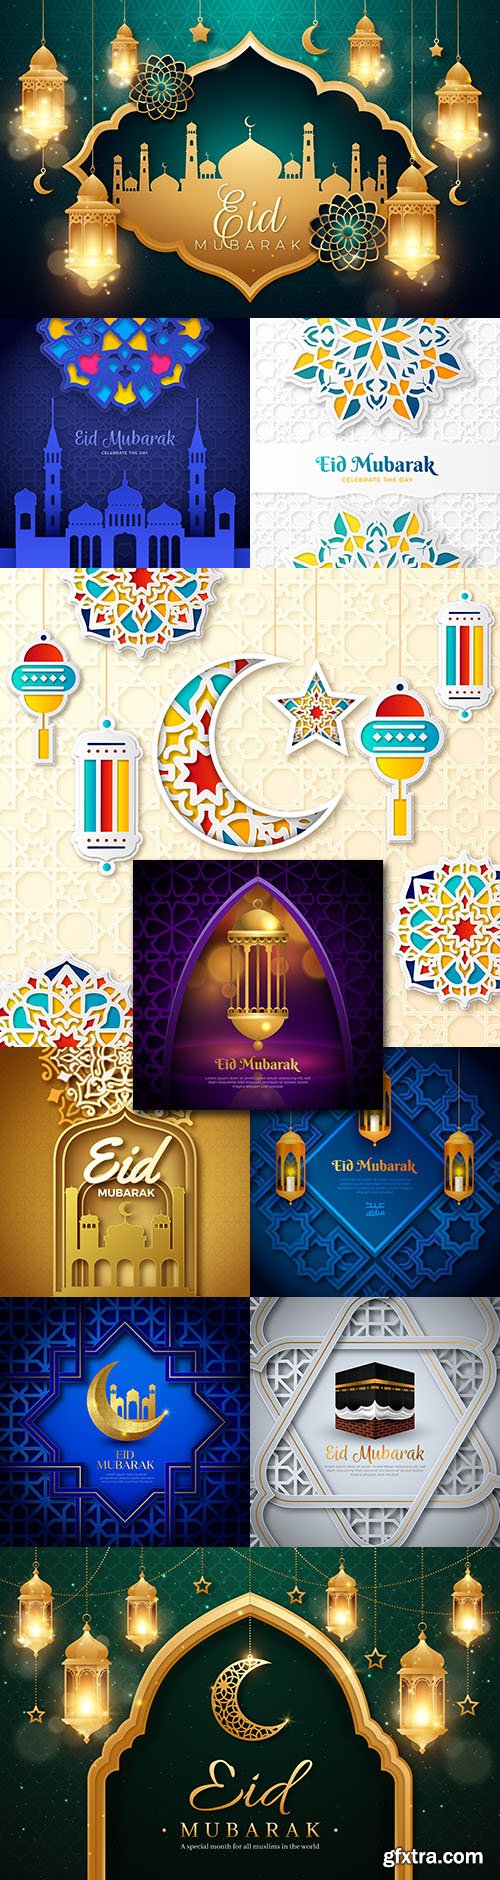 Eid Mubarak pealistic background with candles and mosque